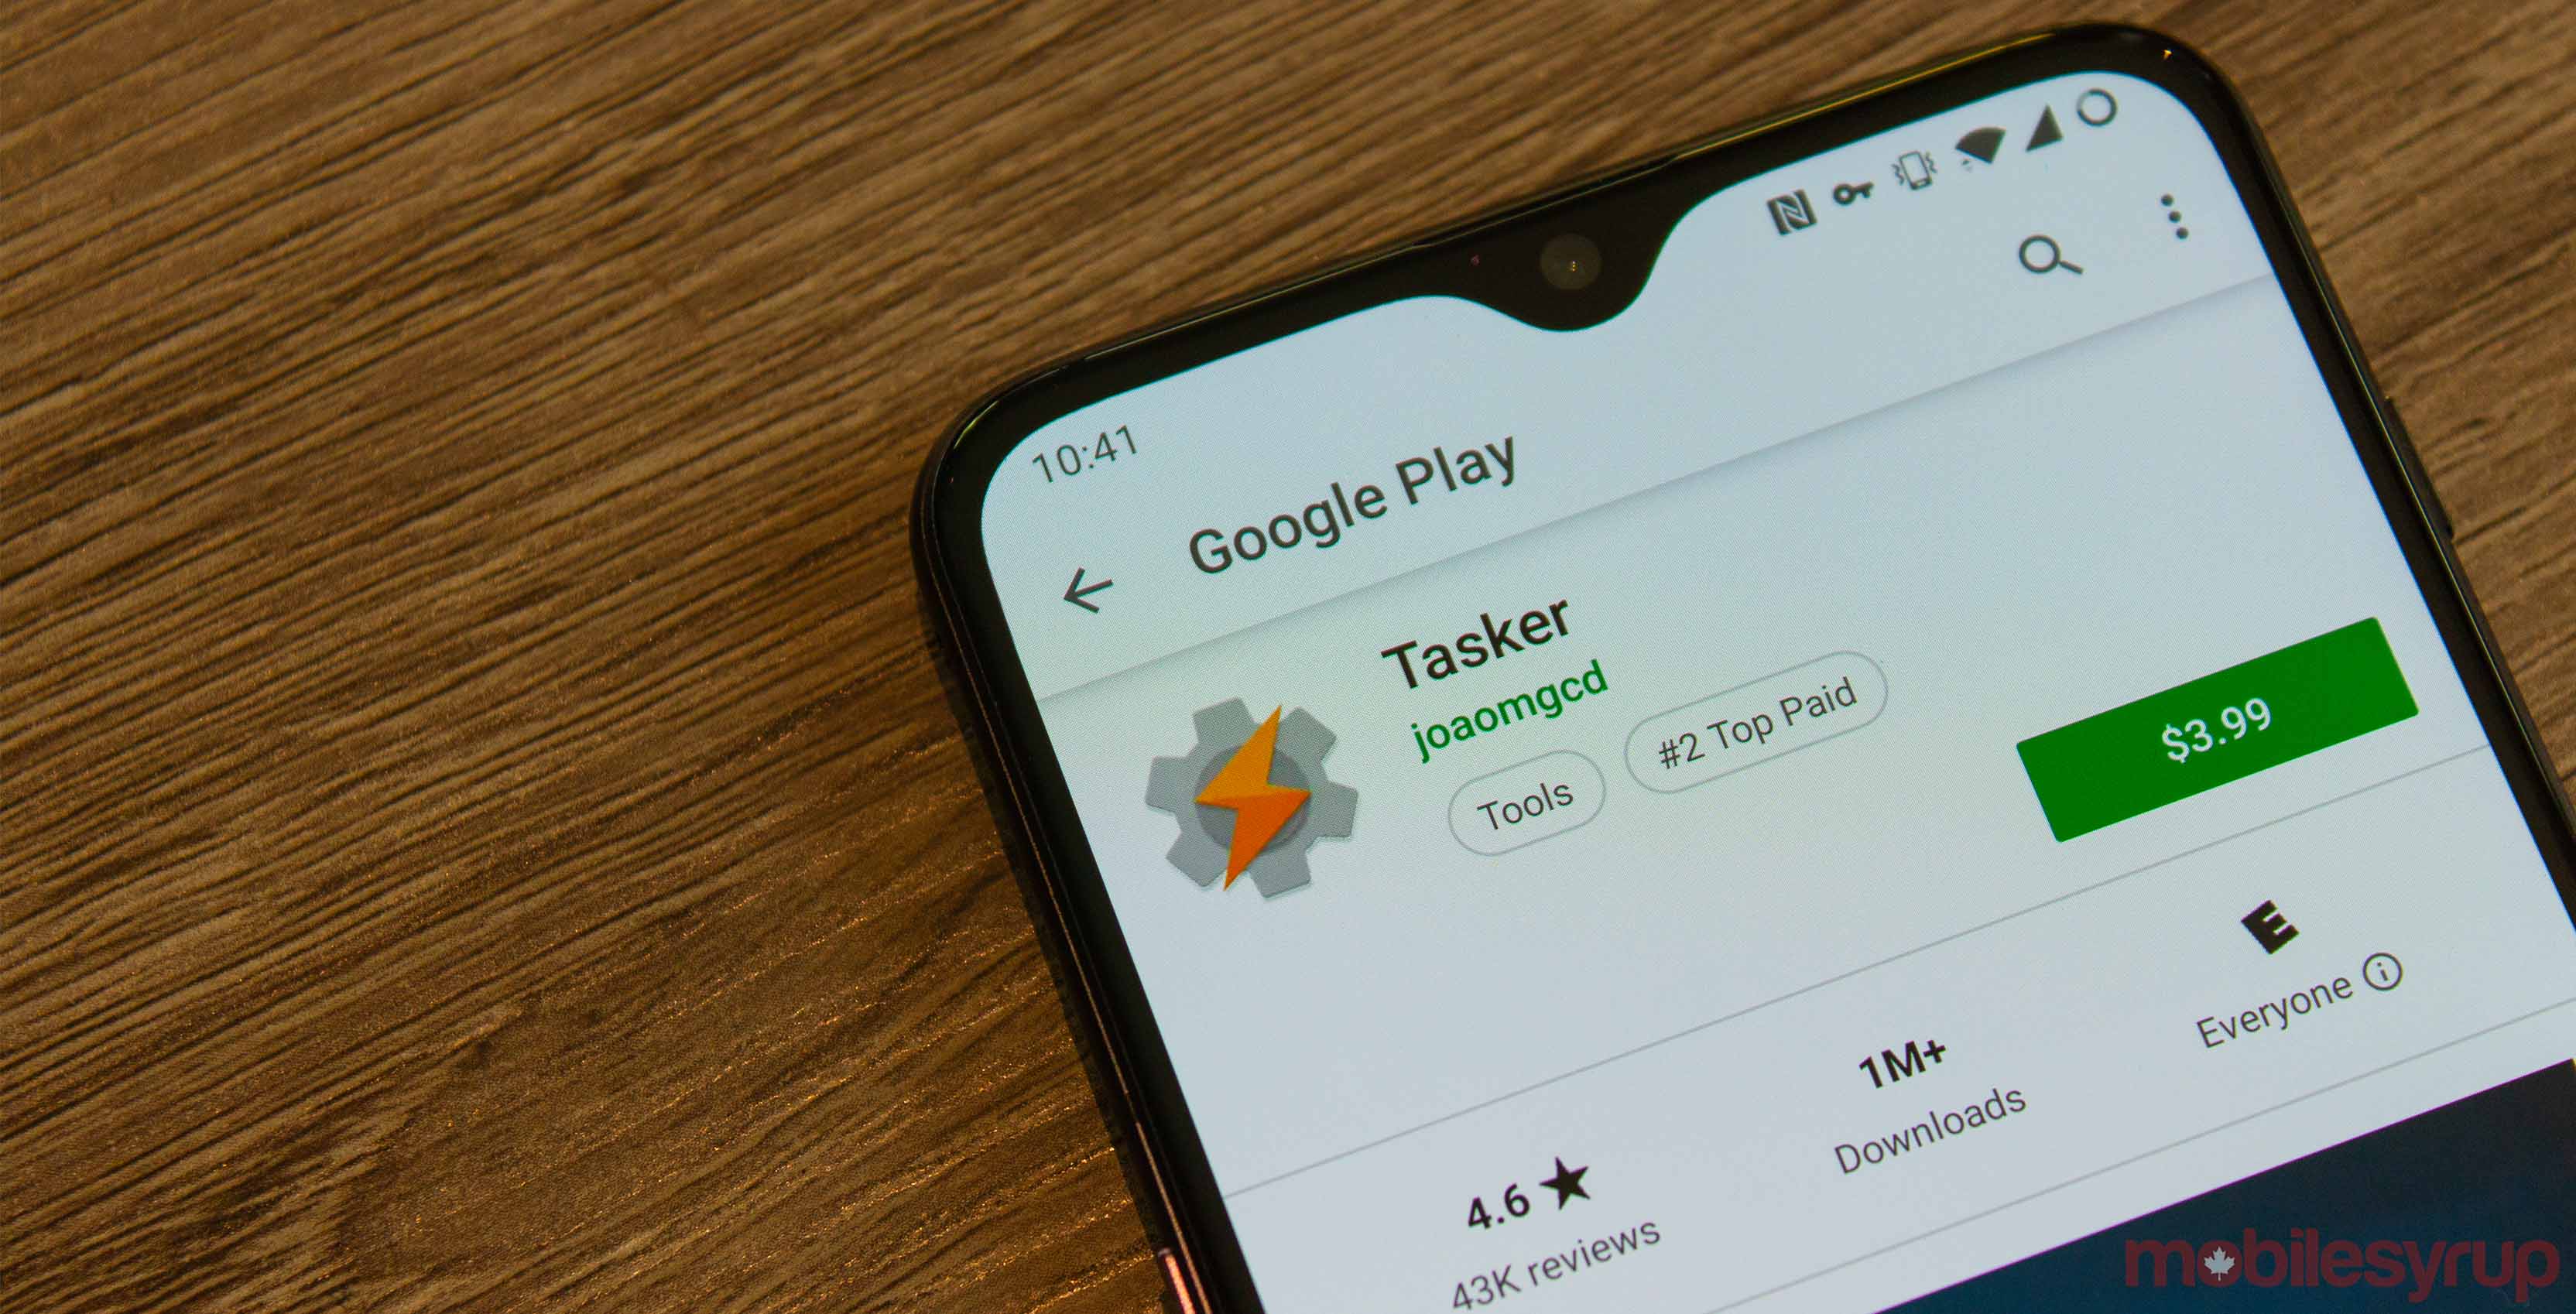 Google exempt Tasker from and SMS permissions restriction